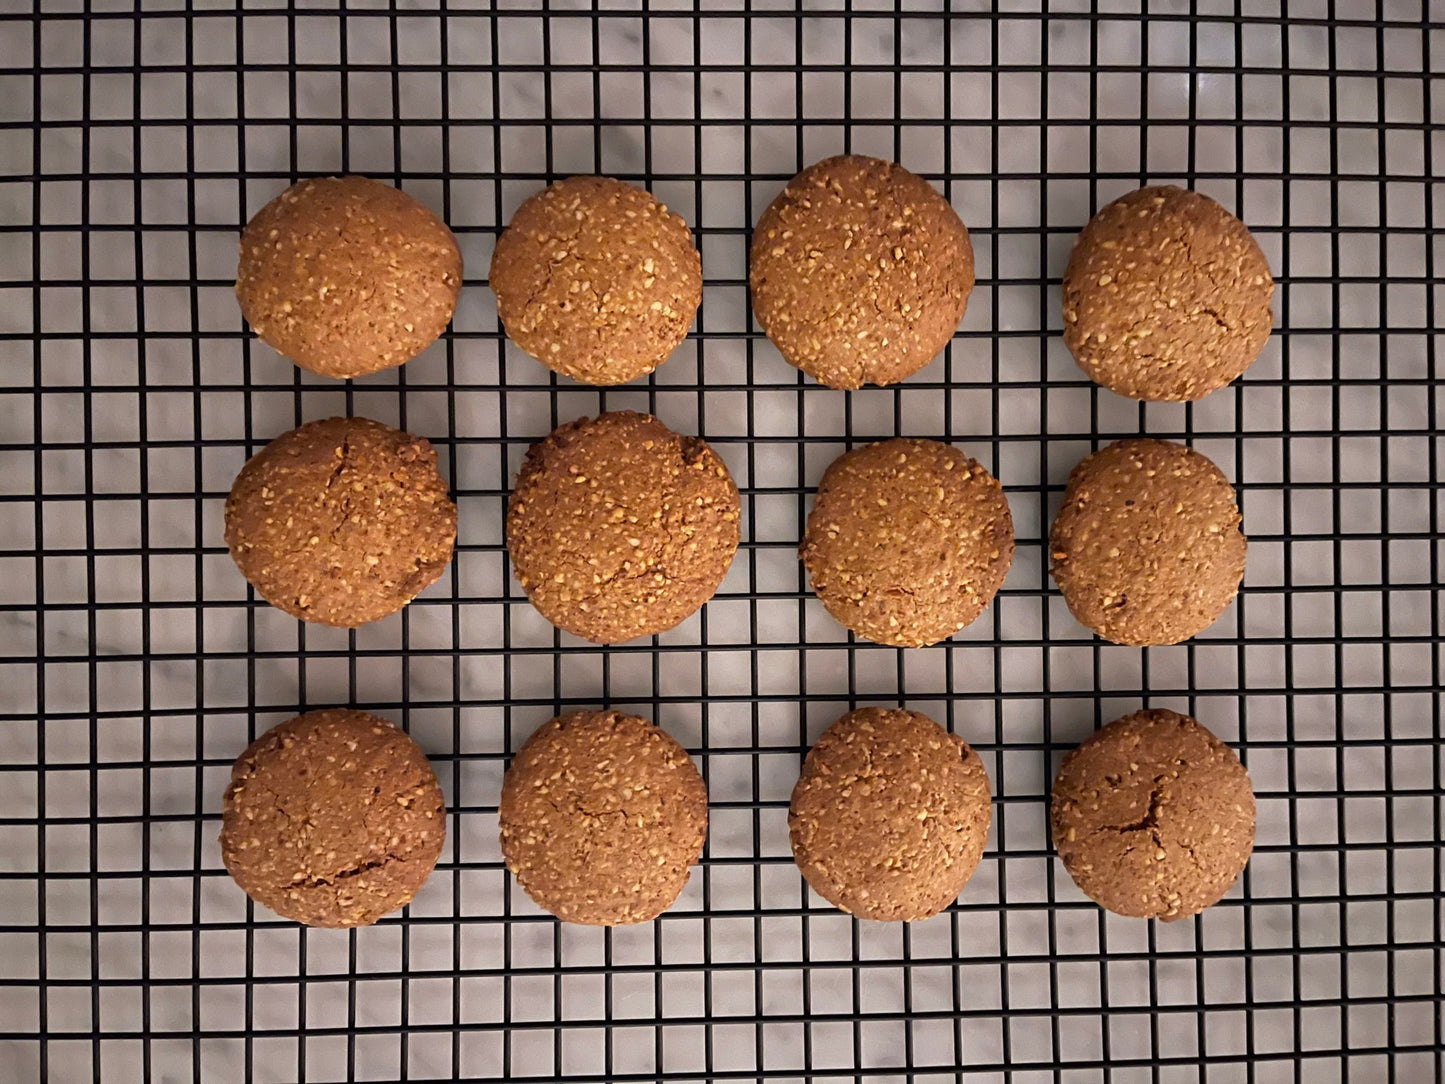 Delicious Gluten-Free Ginger Nut Biscuits